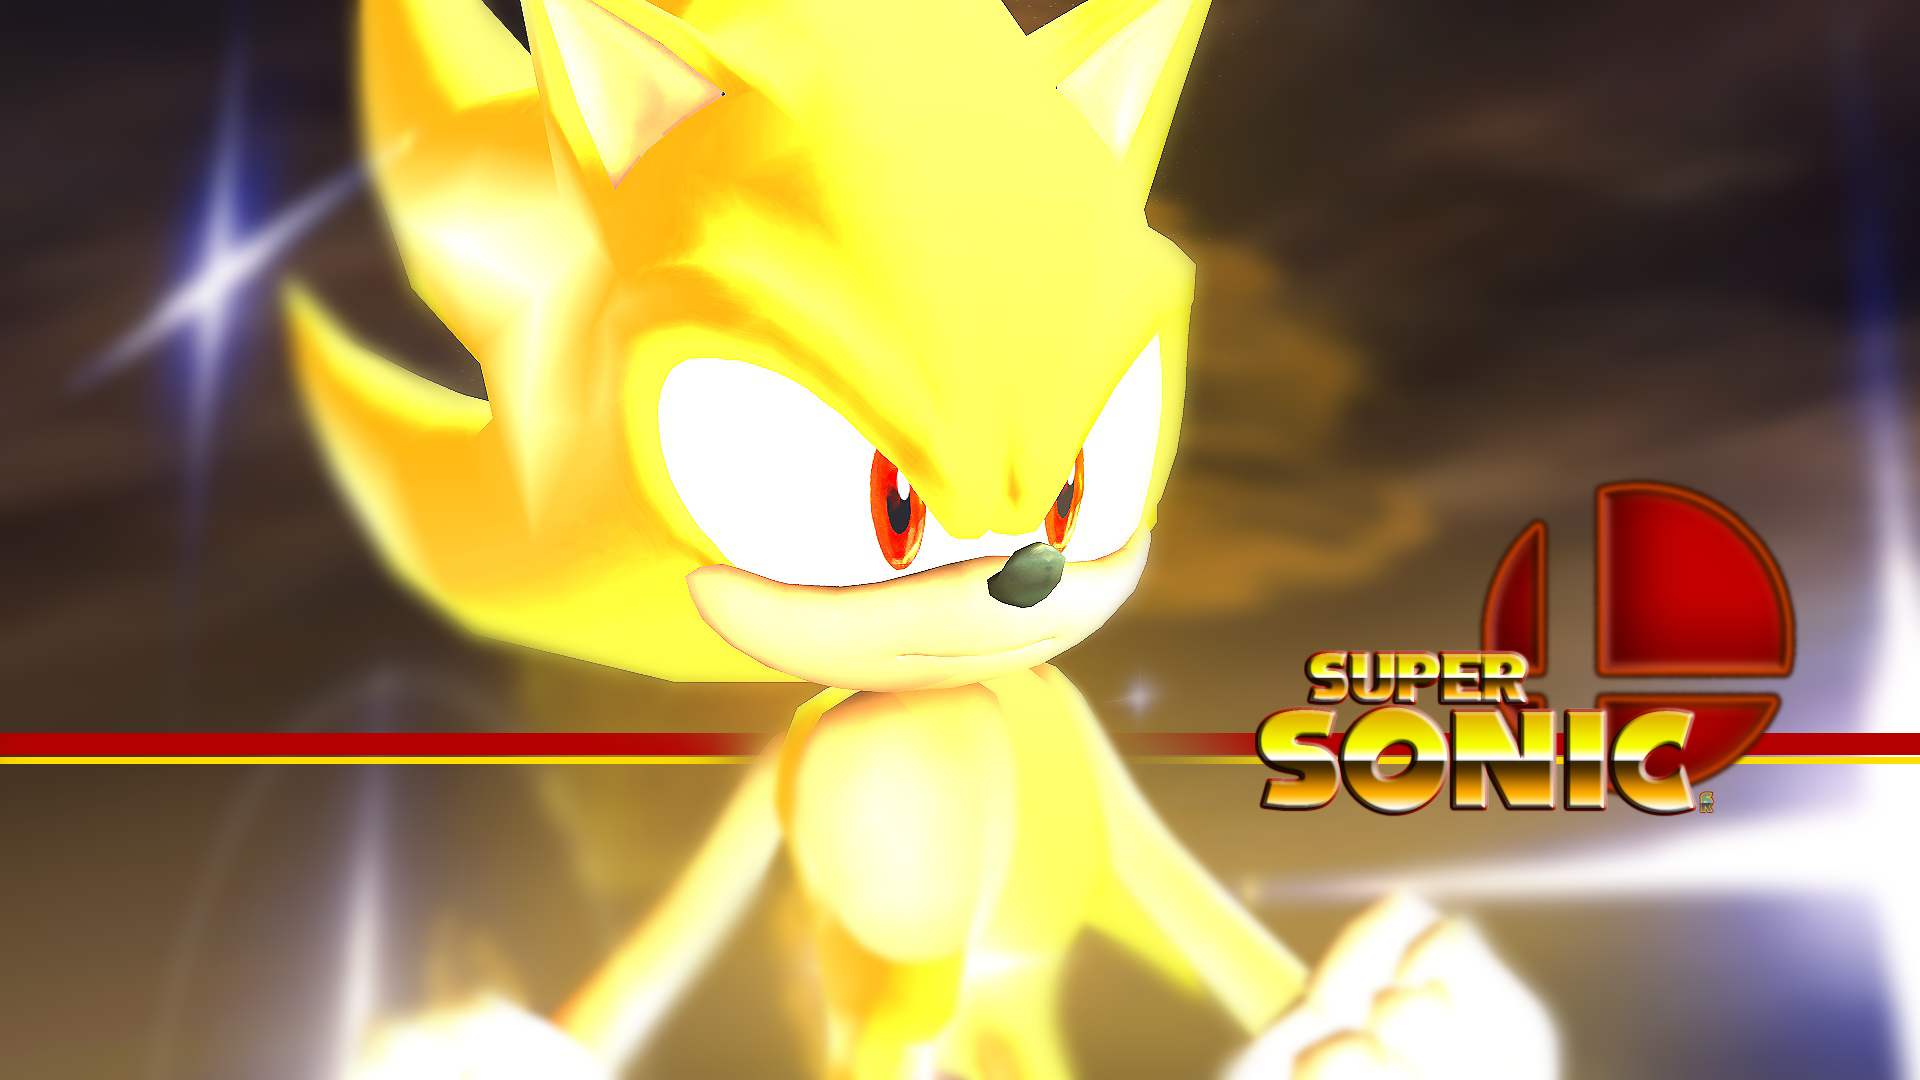 Ssbb Supersonic Wallpaper By Realsonicspeed